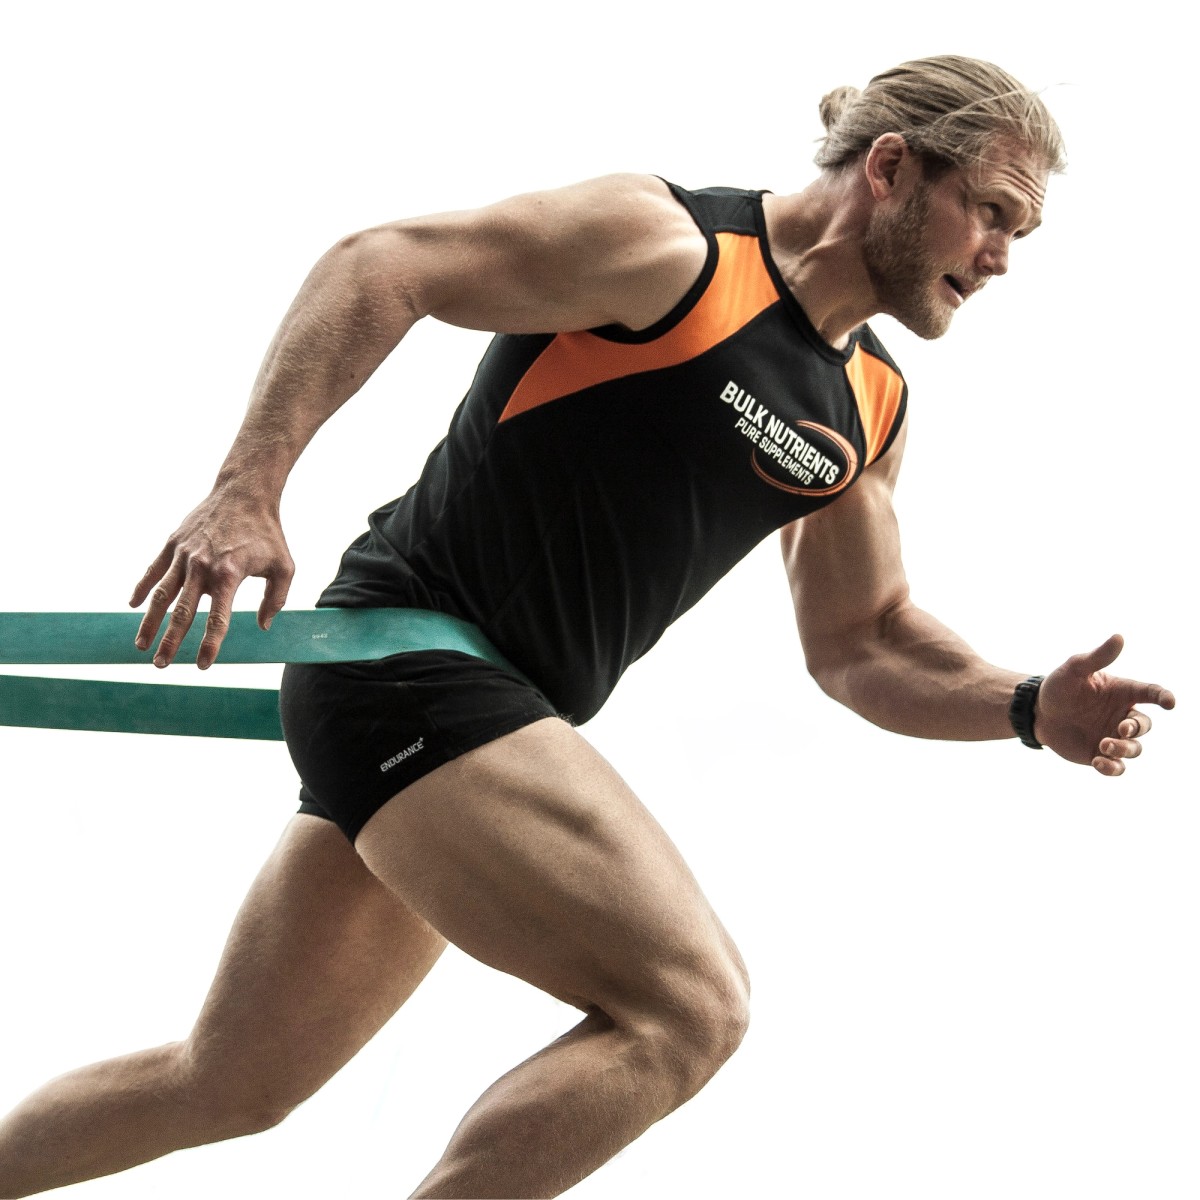 Try out Thor’s resistance band workout.